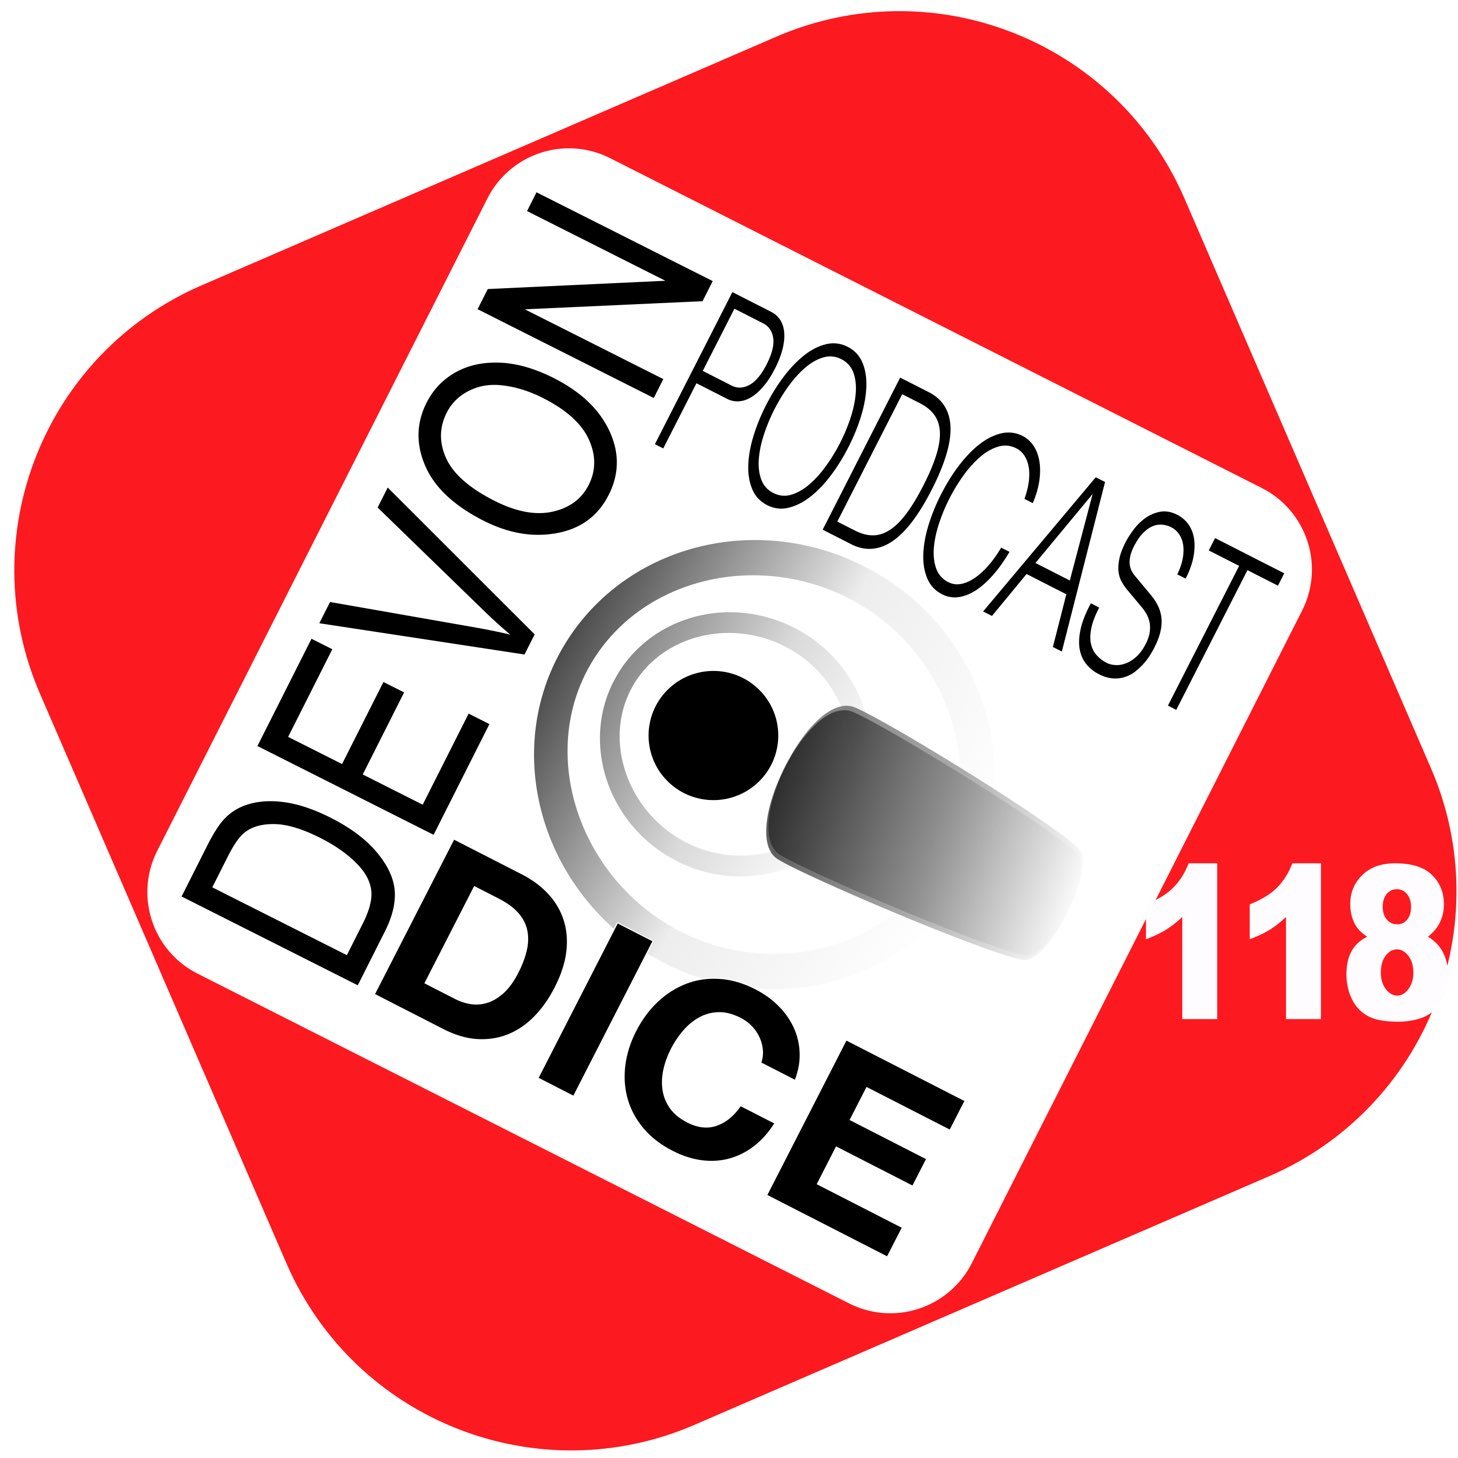 118 Devon Dice Podcast the best Board Games of 2019